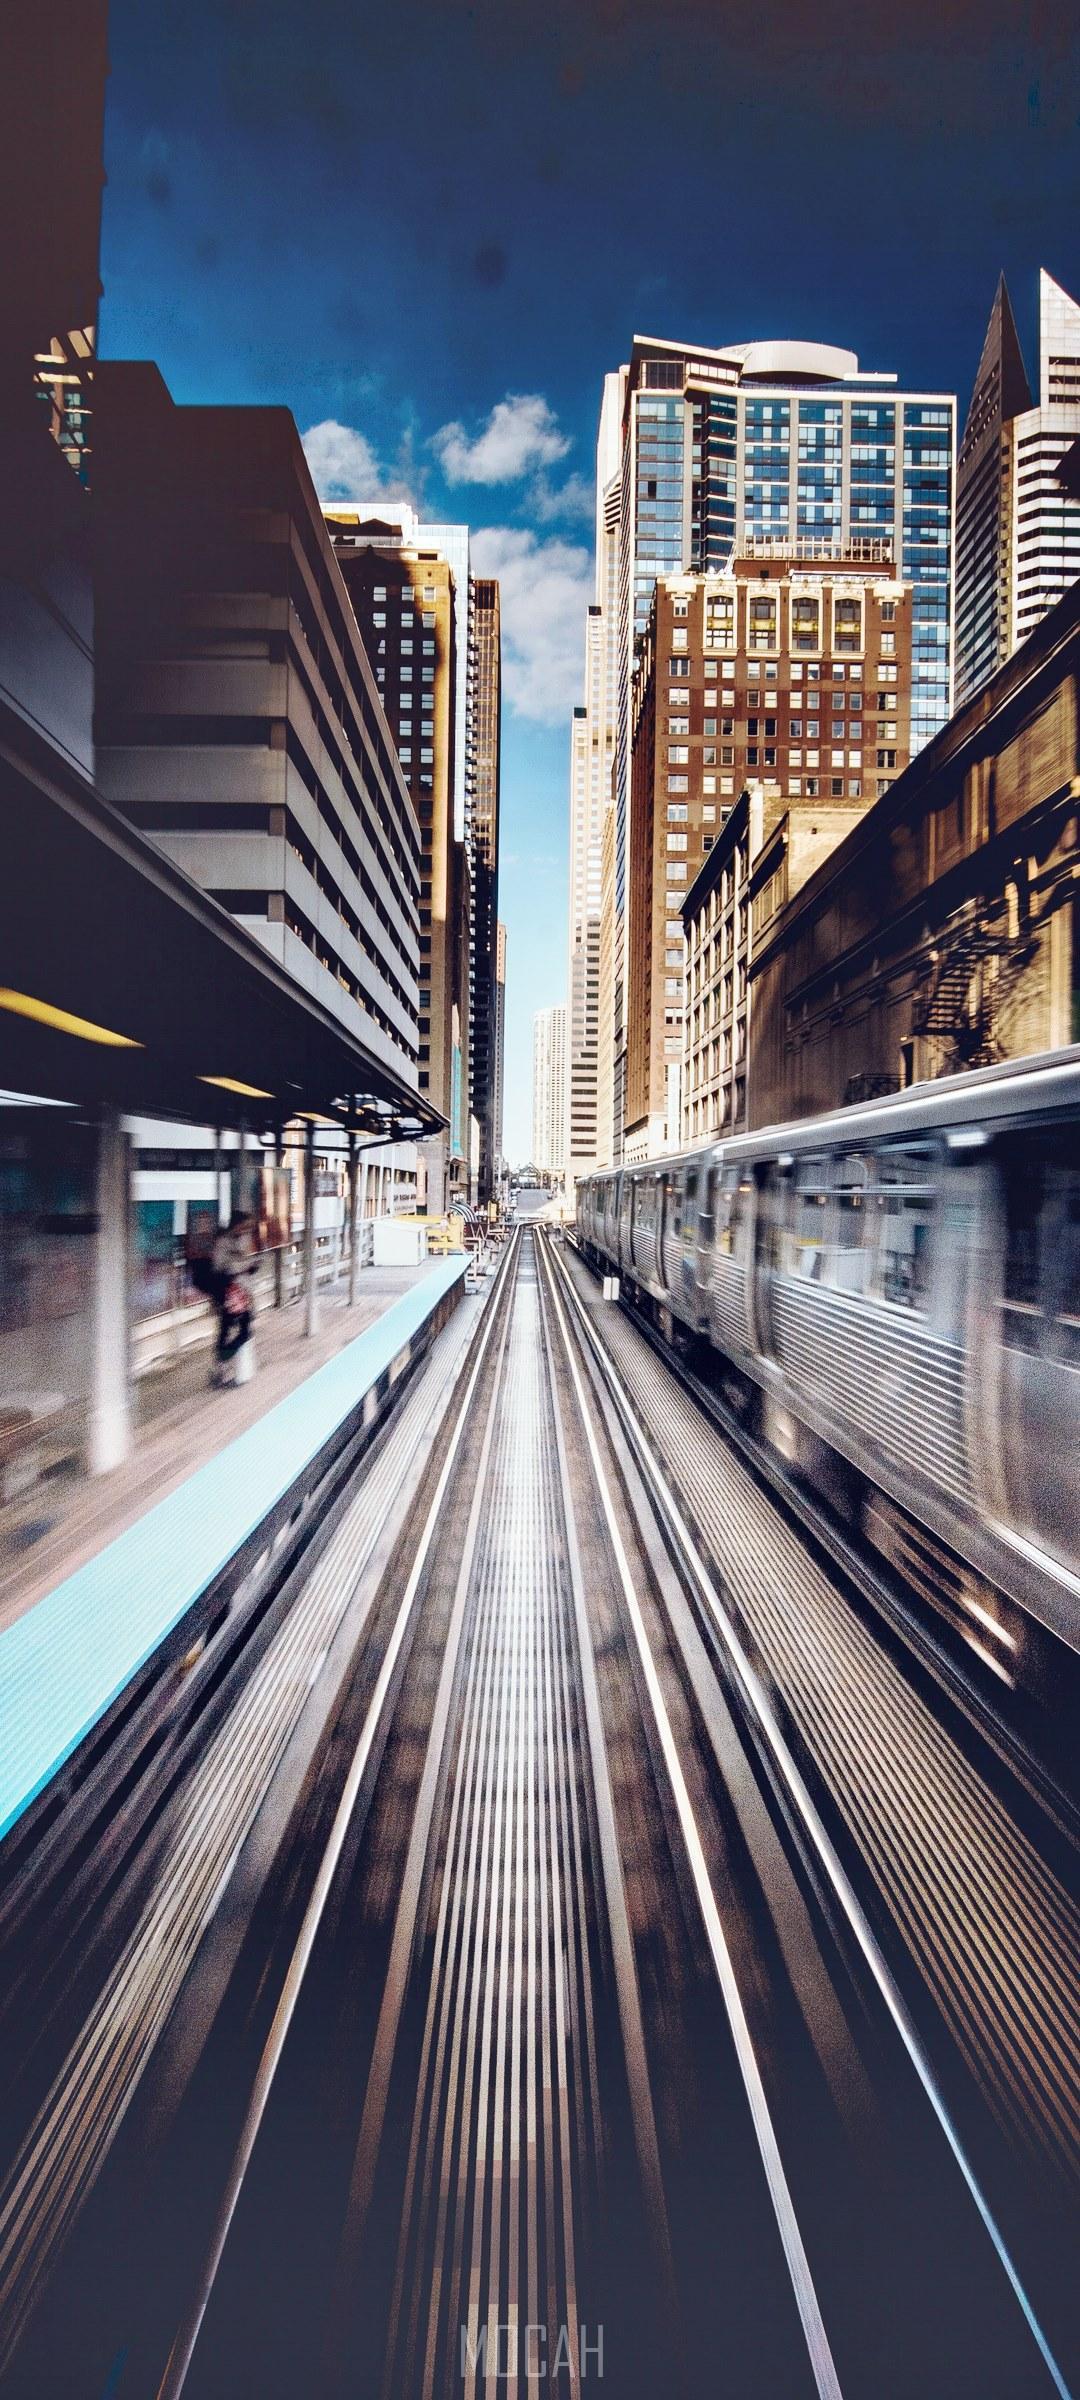 HD wallpaper, A Blurred Image Showing Trains Moving On An Outdoor Railway In Chicago, Samsung Galaxy A71 5G Wallpaper Hd, Train Station Action In Chicago, 1080X2400